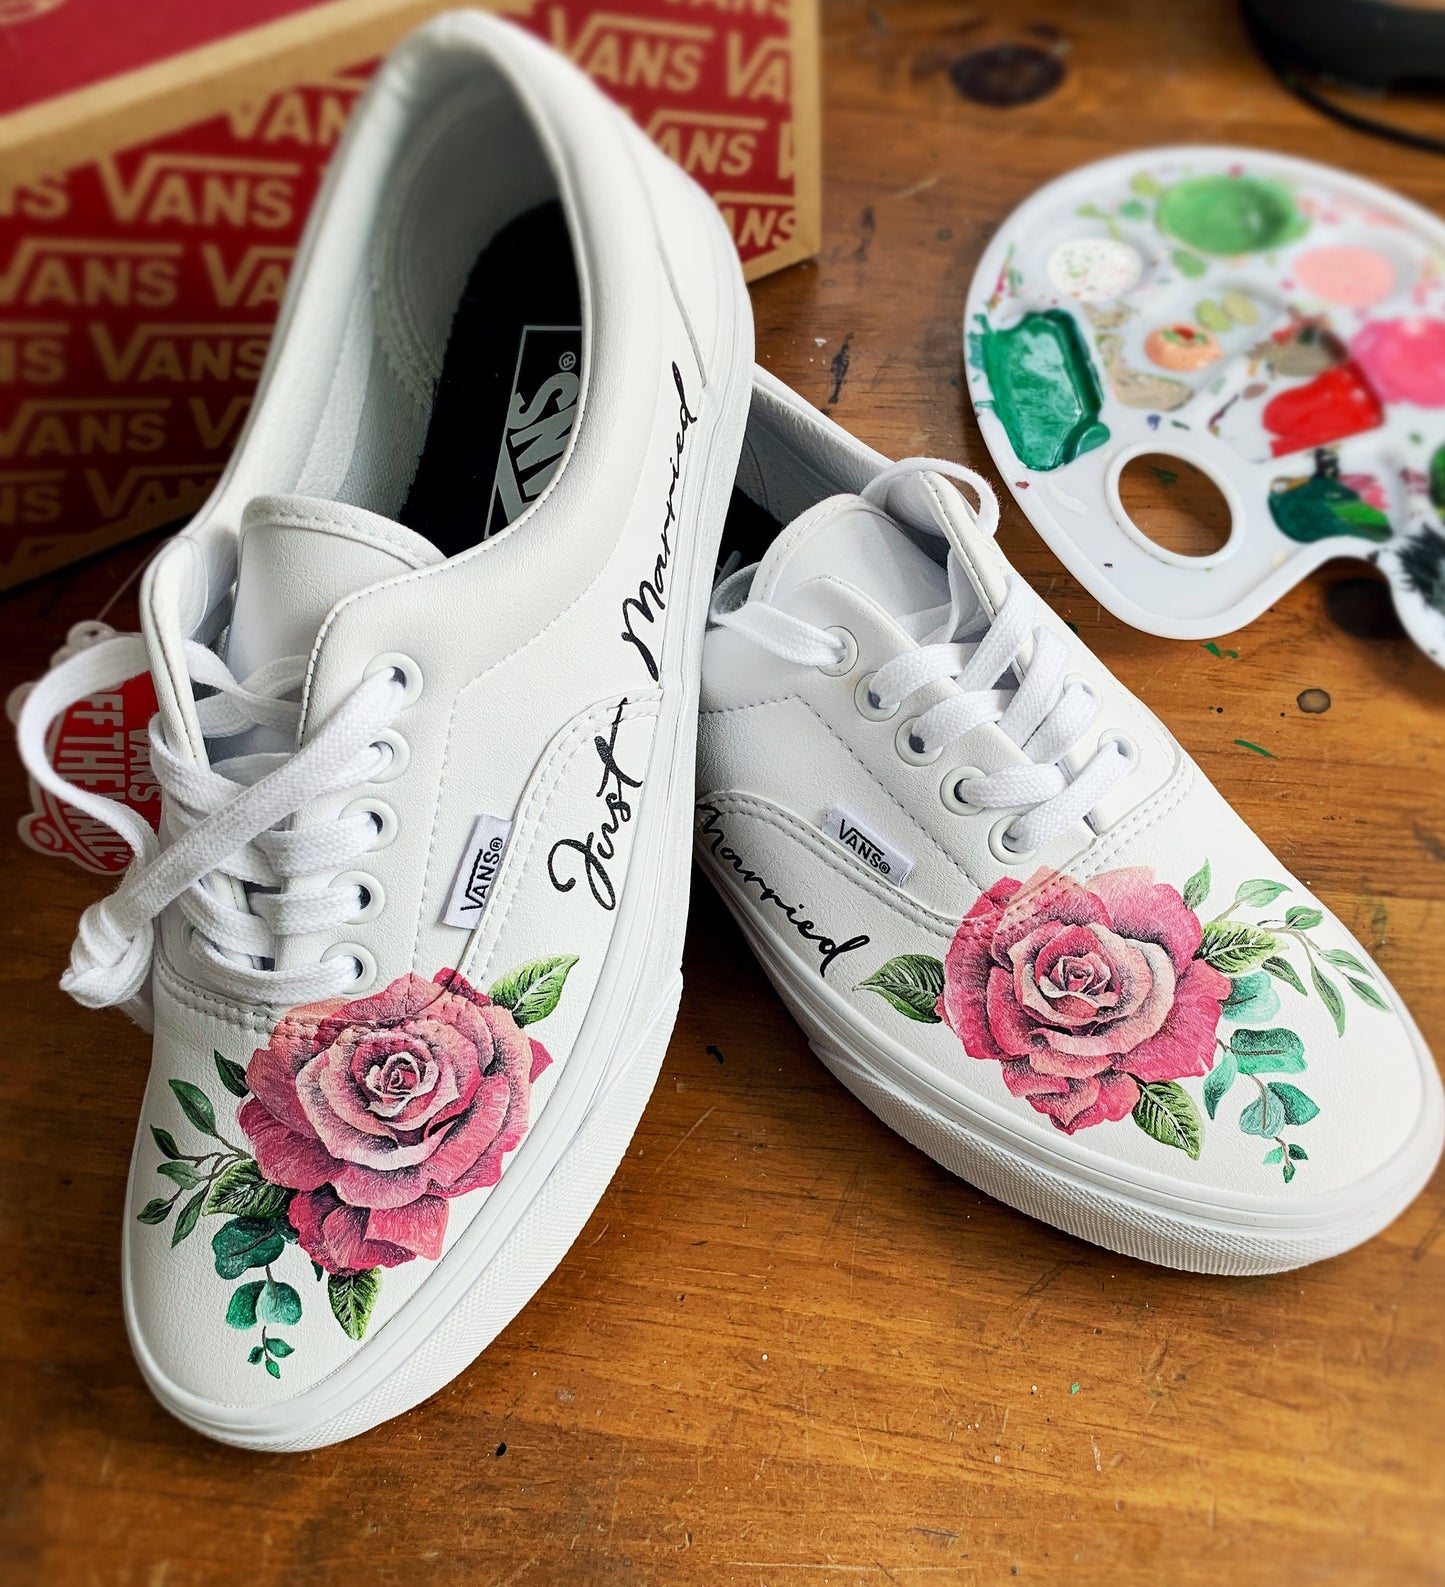 Custom converse, hand painted shoes, painted converse, wedding shoes, wedding converse, painting only